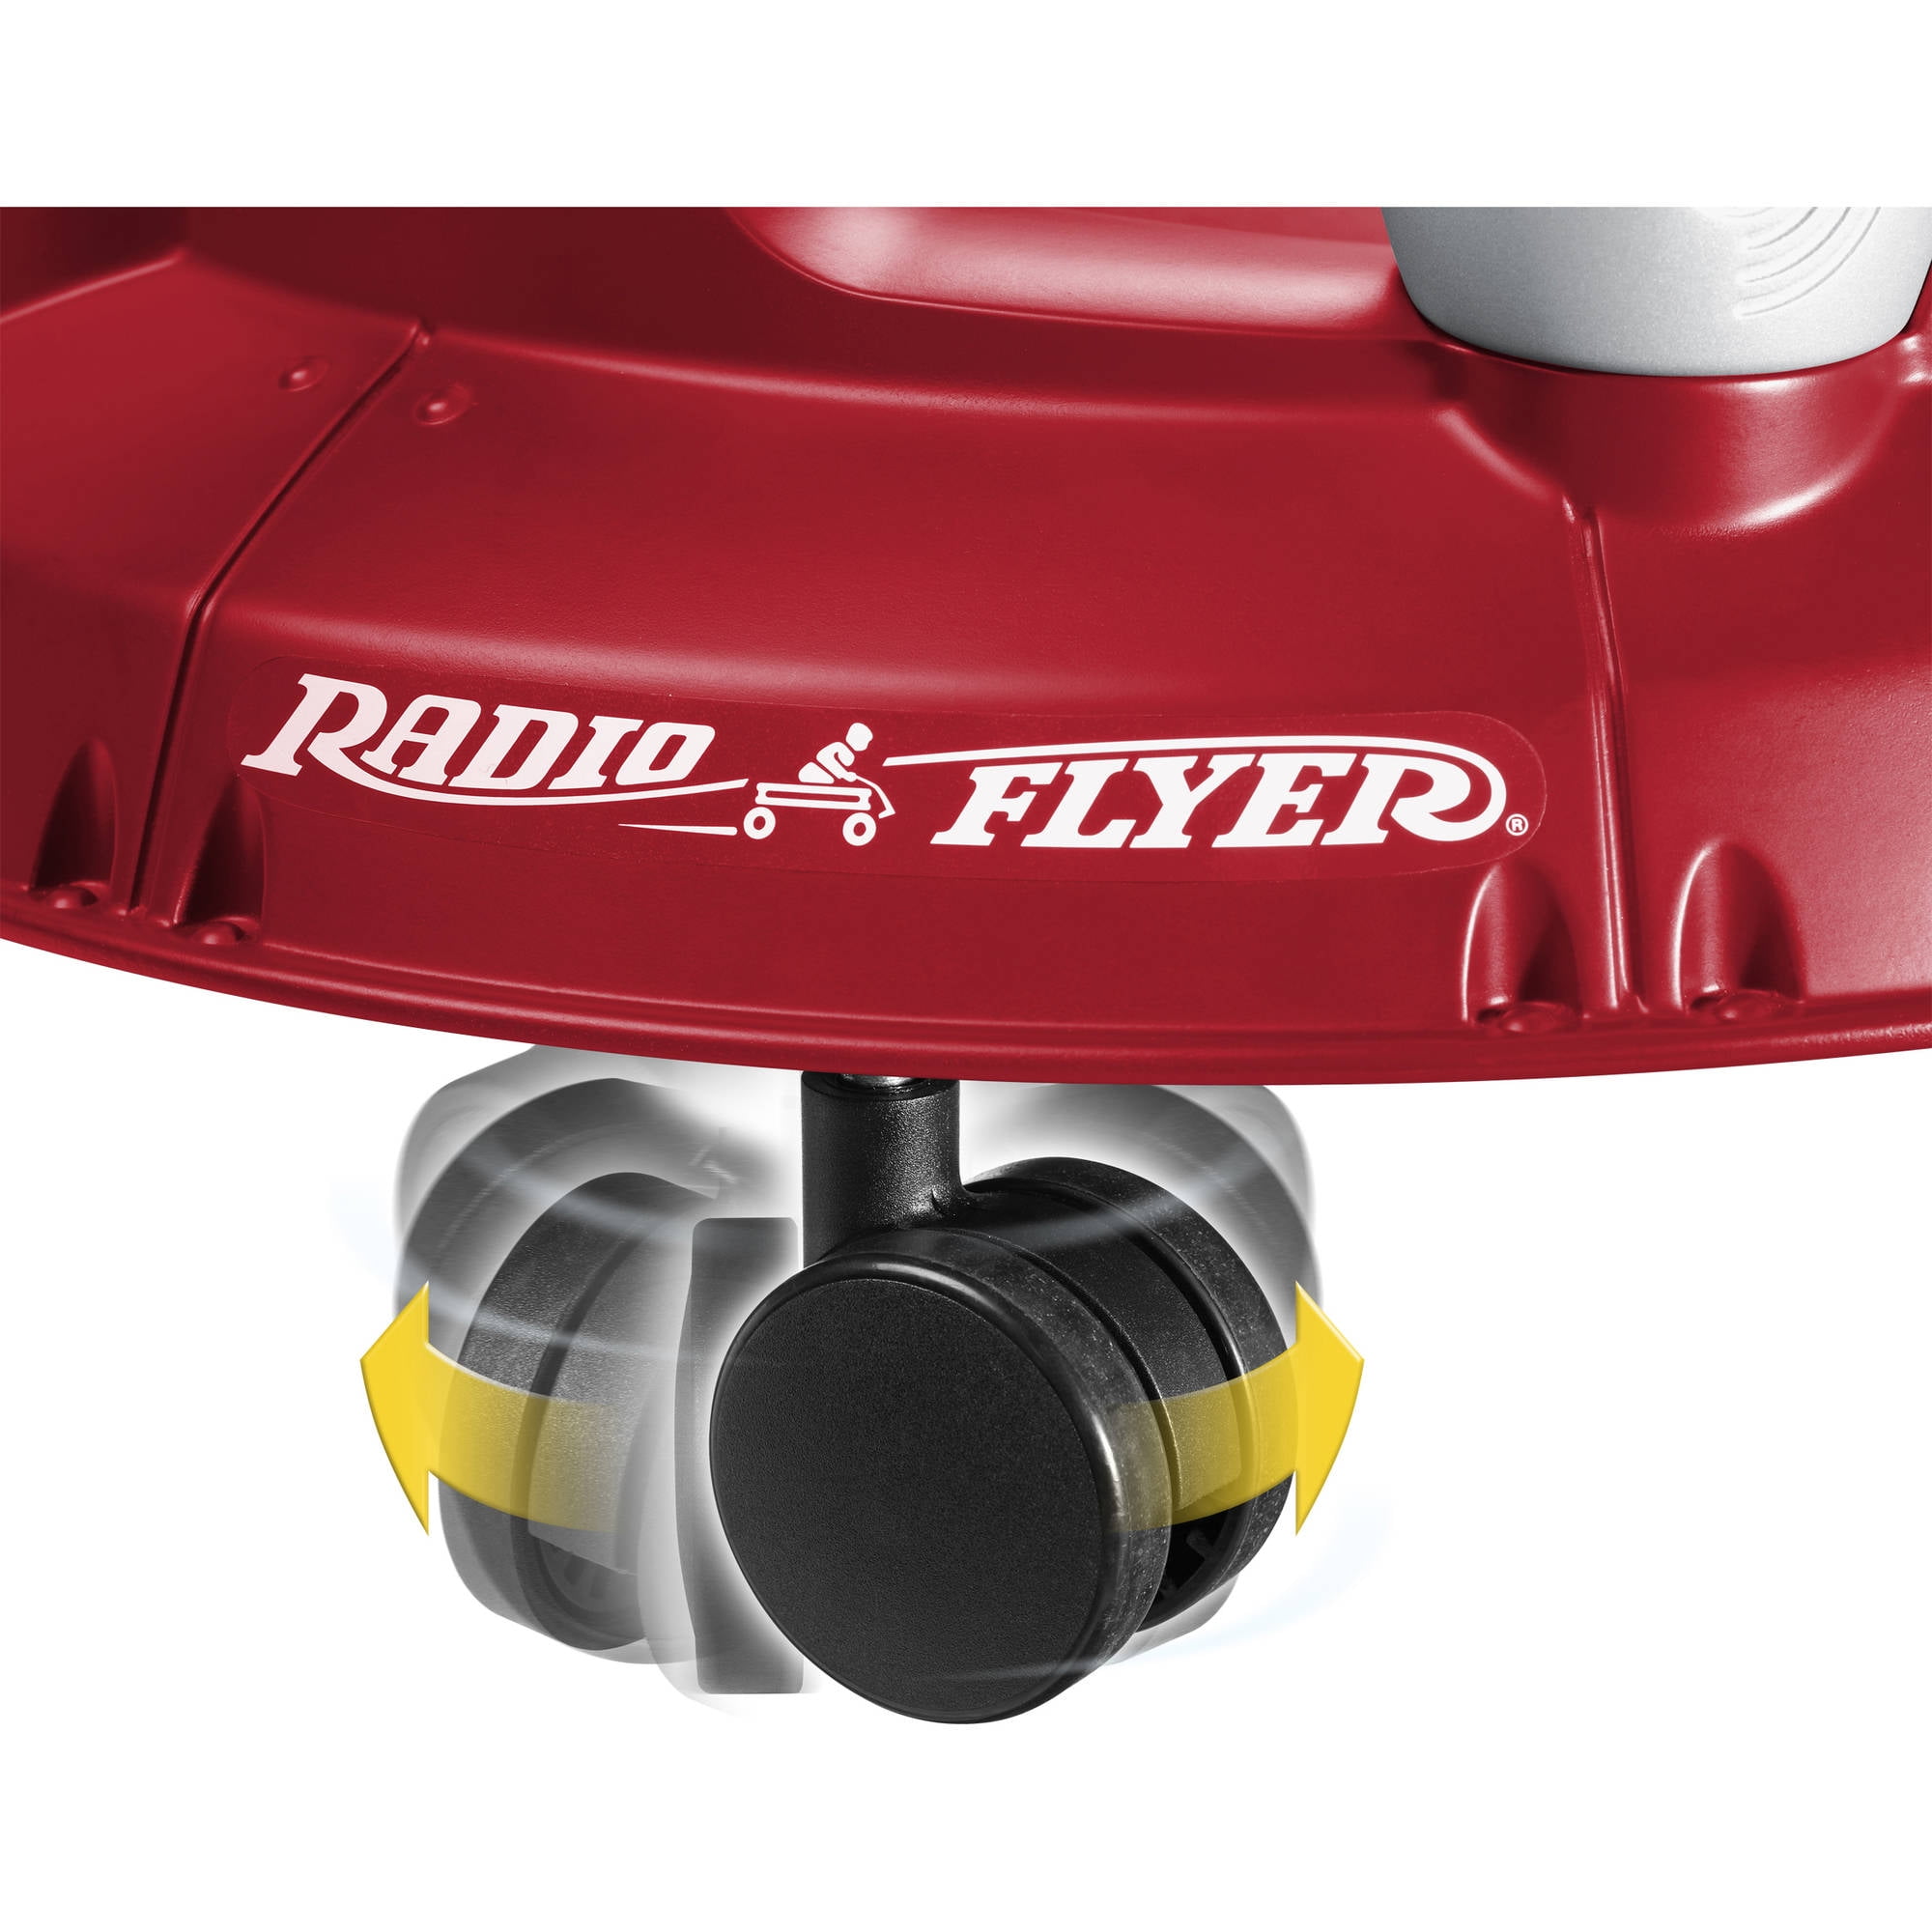 Radio Flyer, Spin 'N' Saucer, Caster Ride-on for Kids, Red - 2